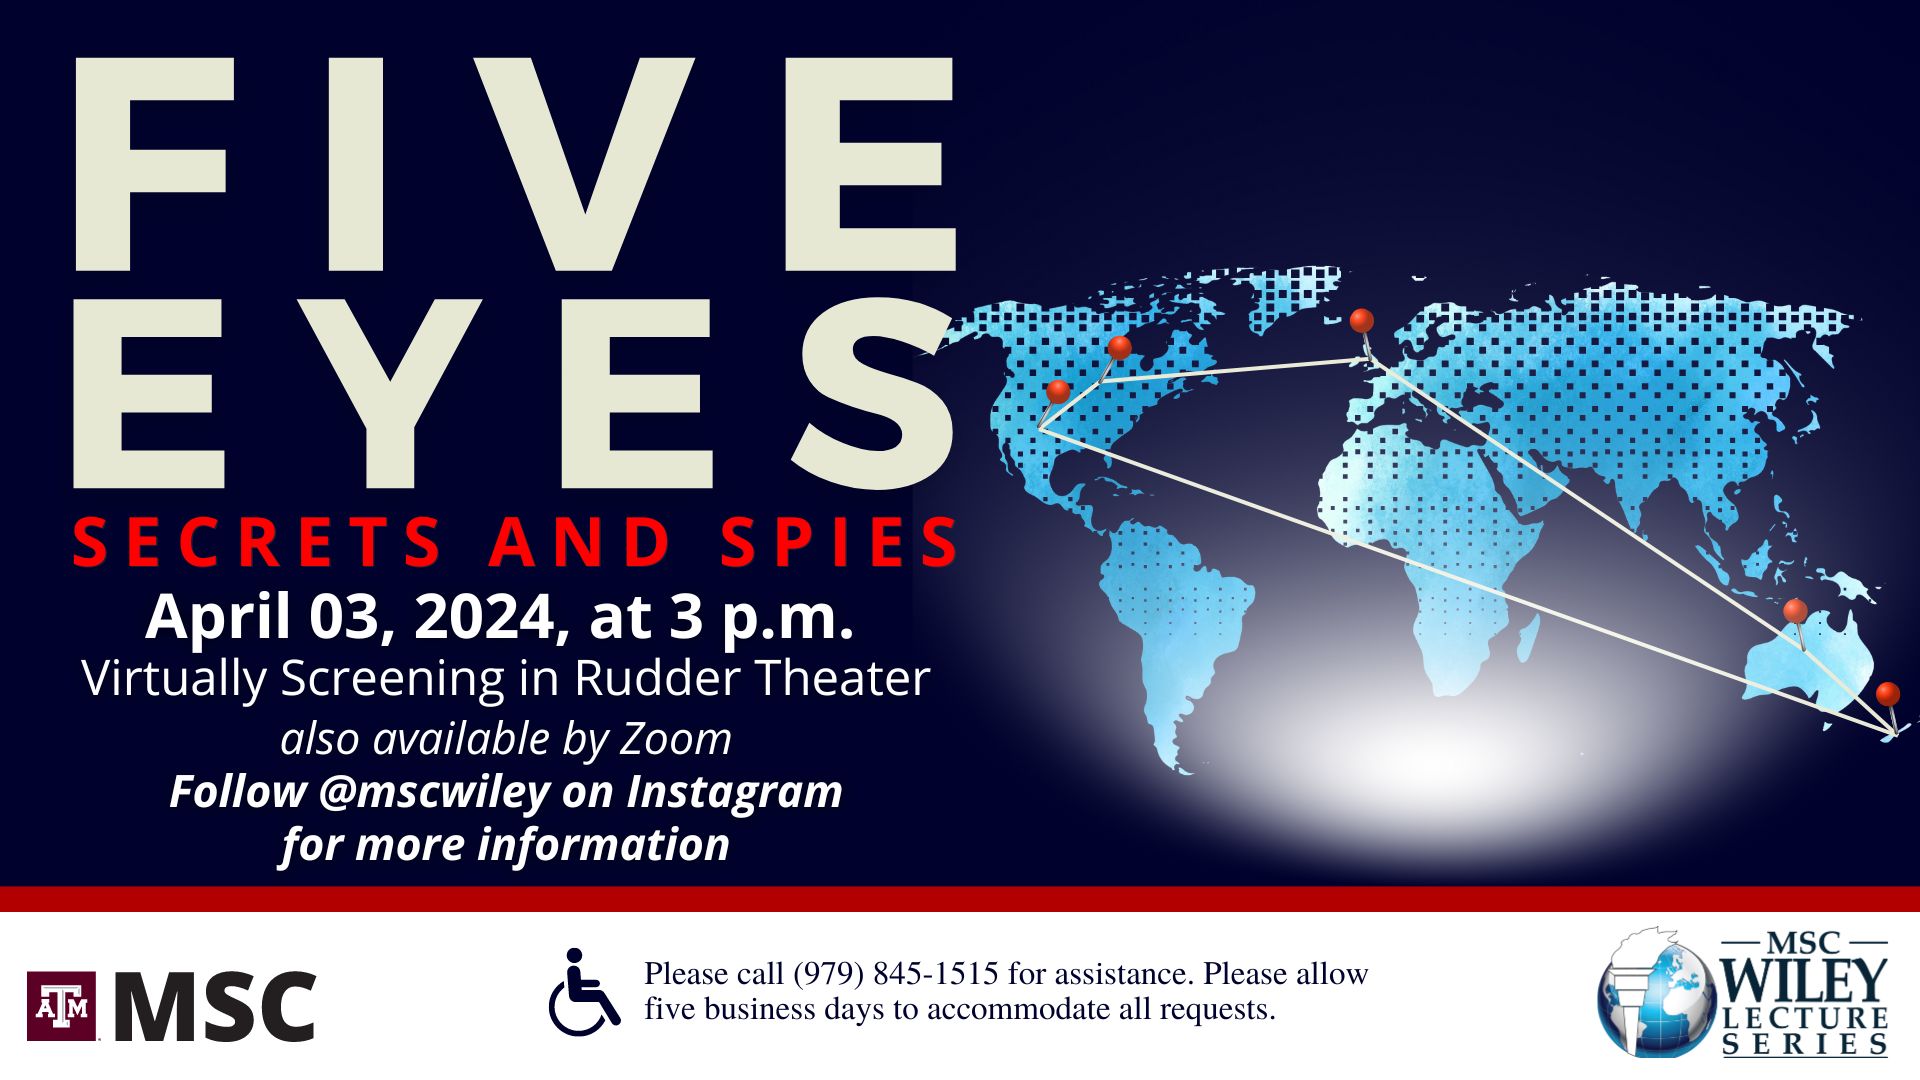 Five Eyes, Secrets and Spies. Hosted by MSC Wiley Lecture Series. April 03, 2024 at 3 p.m. Virtually screening in Rudder Theater, also available by Zoom. Follow @mscwiley on Instagram for more information. Please call 979.845.1515 for assistance. Please allow 10 business days to accommodate all requests.